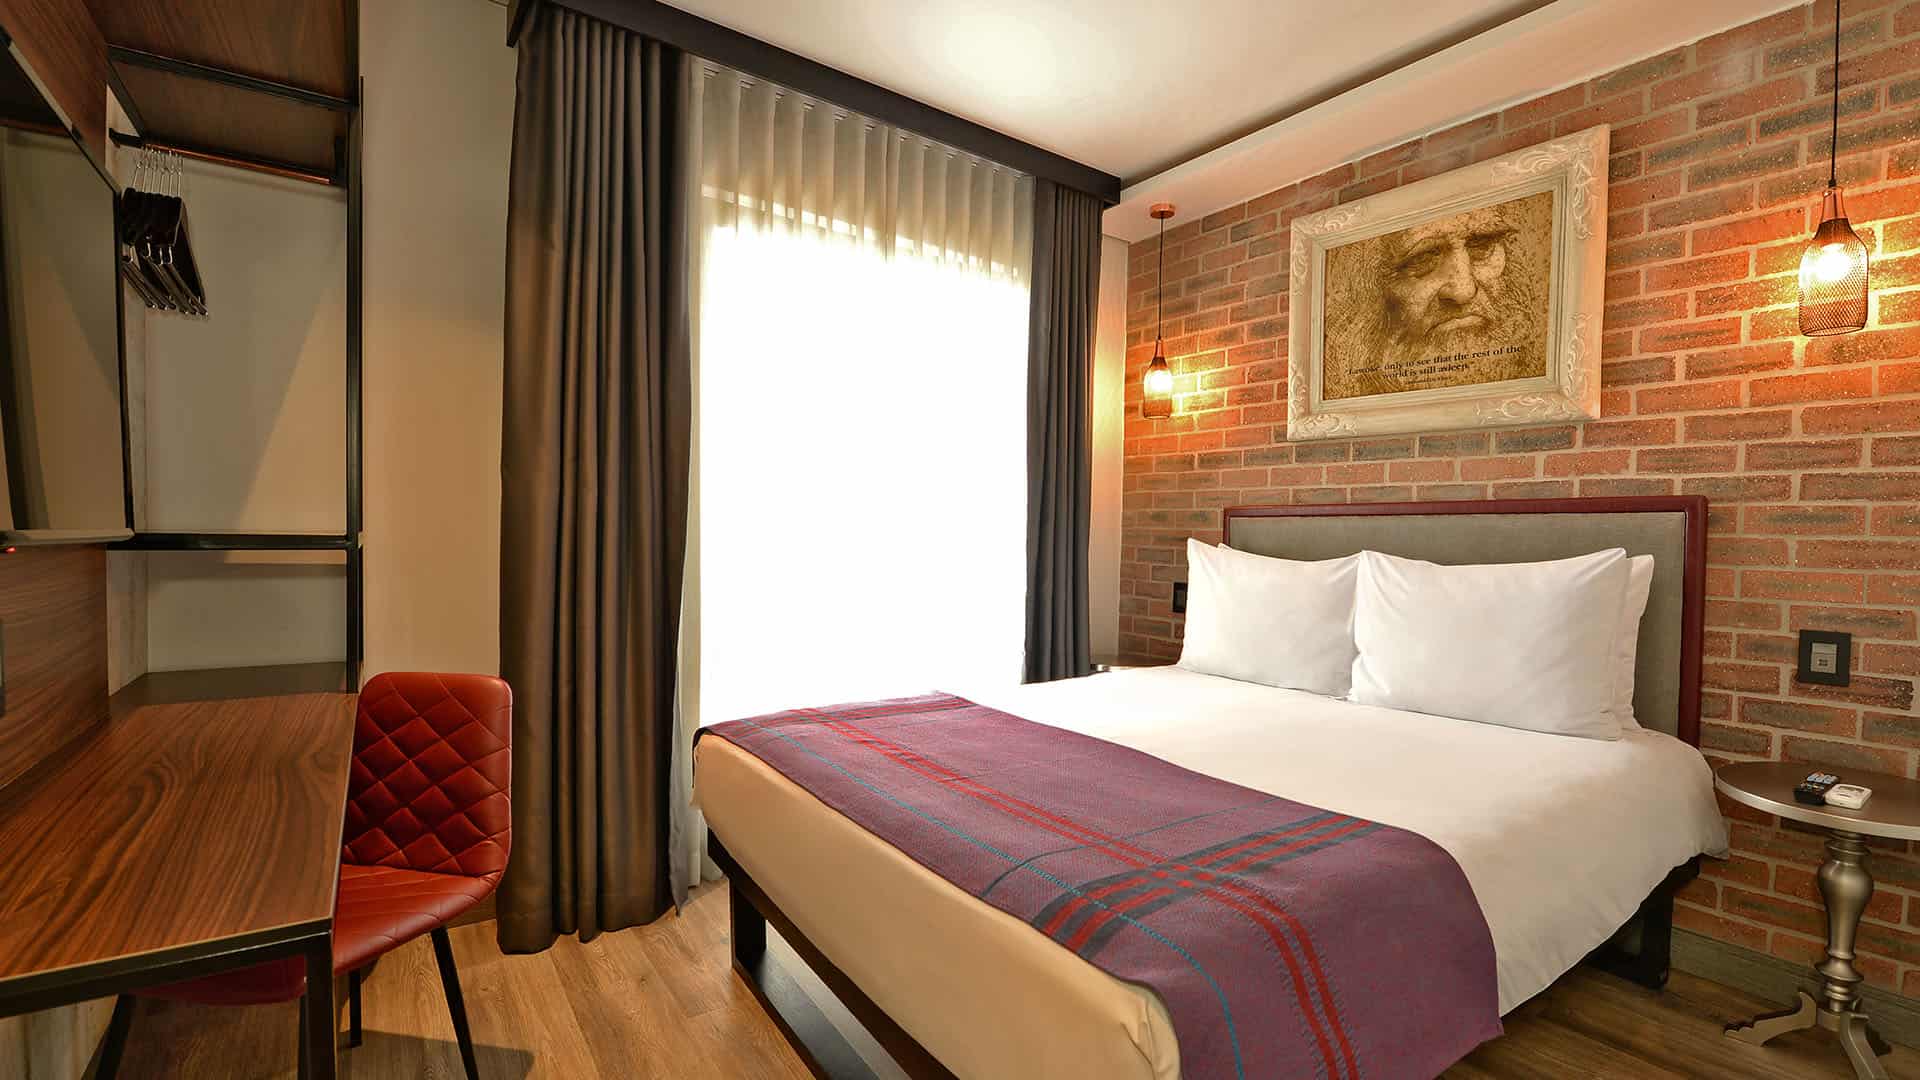 Hotel Perte Queen Room with a queen bed suitable for up to two people sharing.